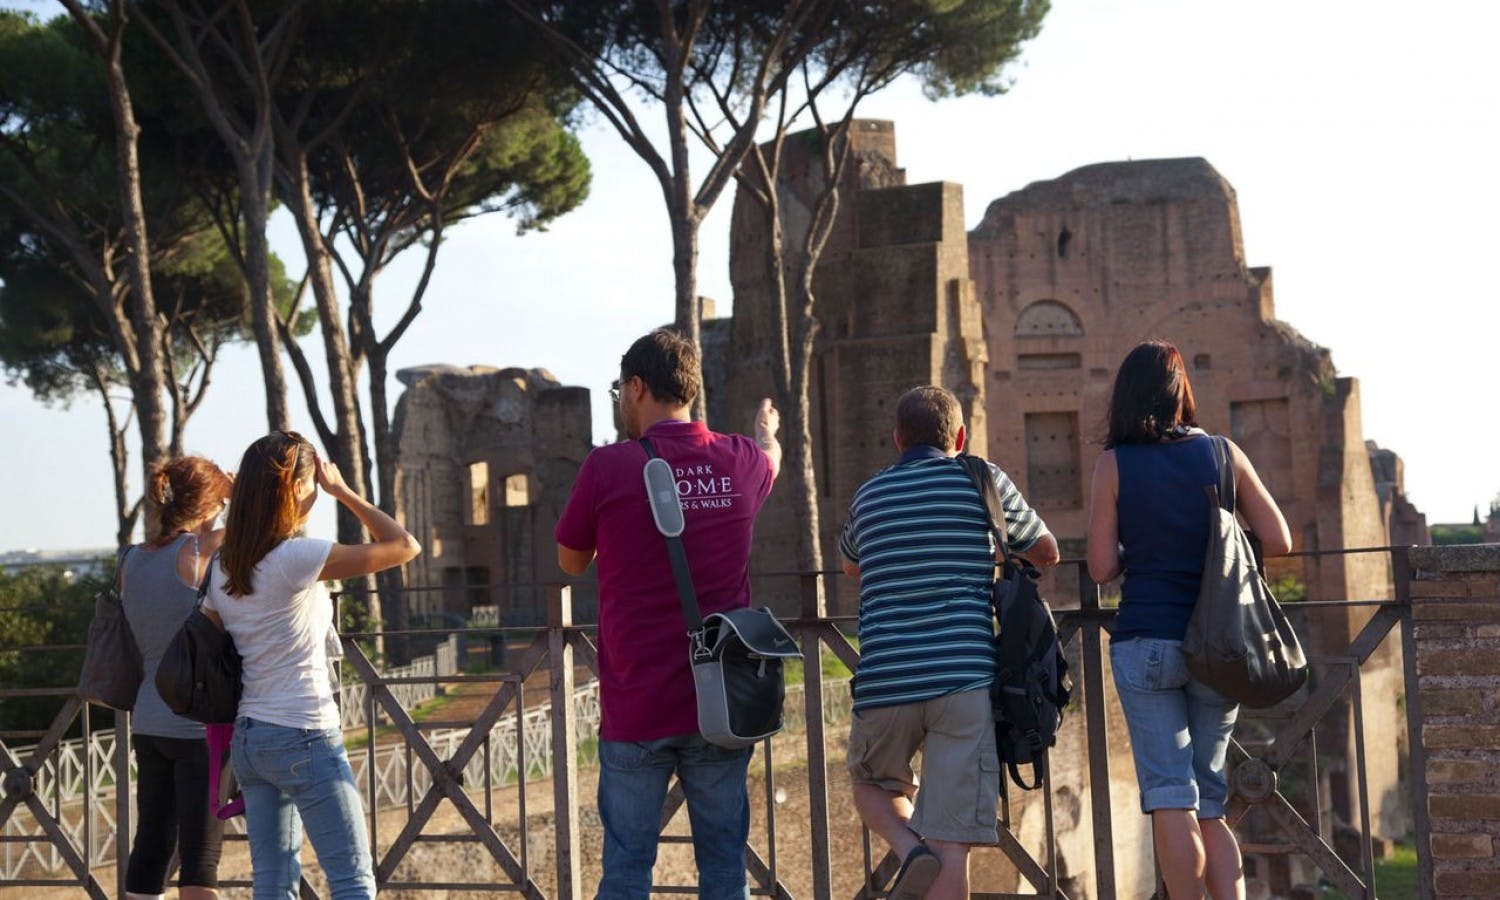 Full day Rome tour: skip-the-line Vatican Museums and Colosseum guided tour-5